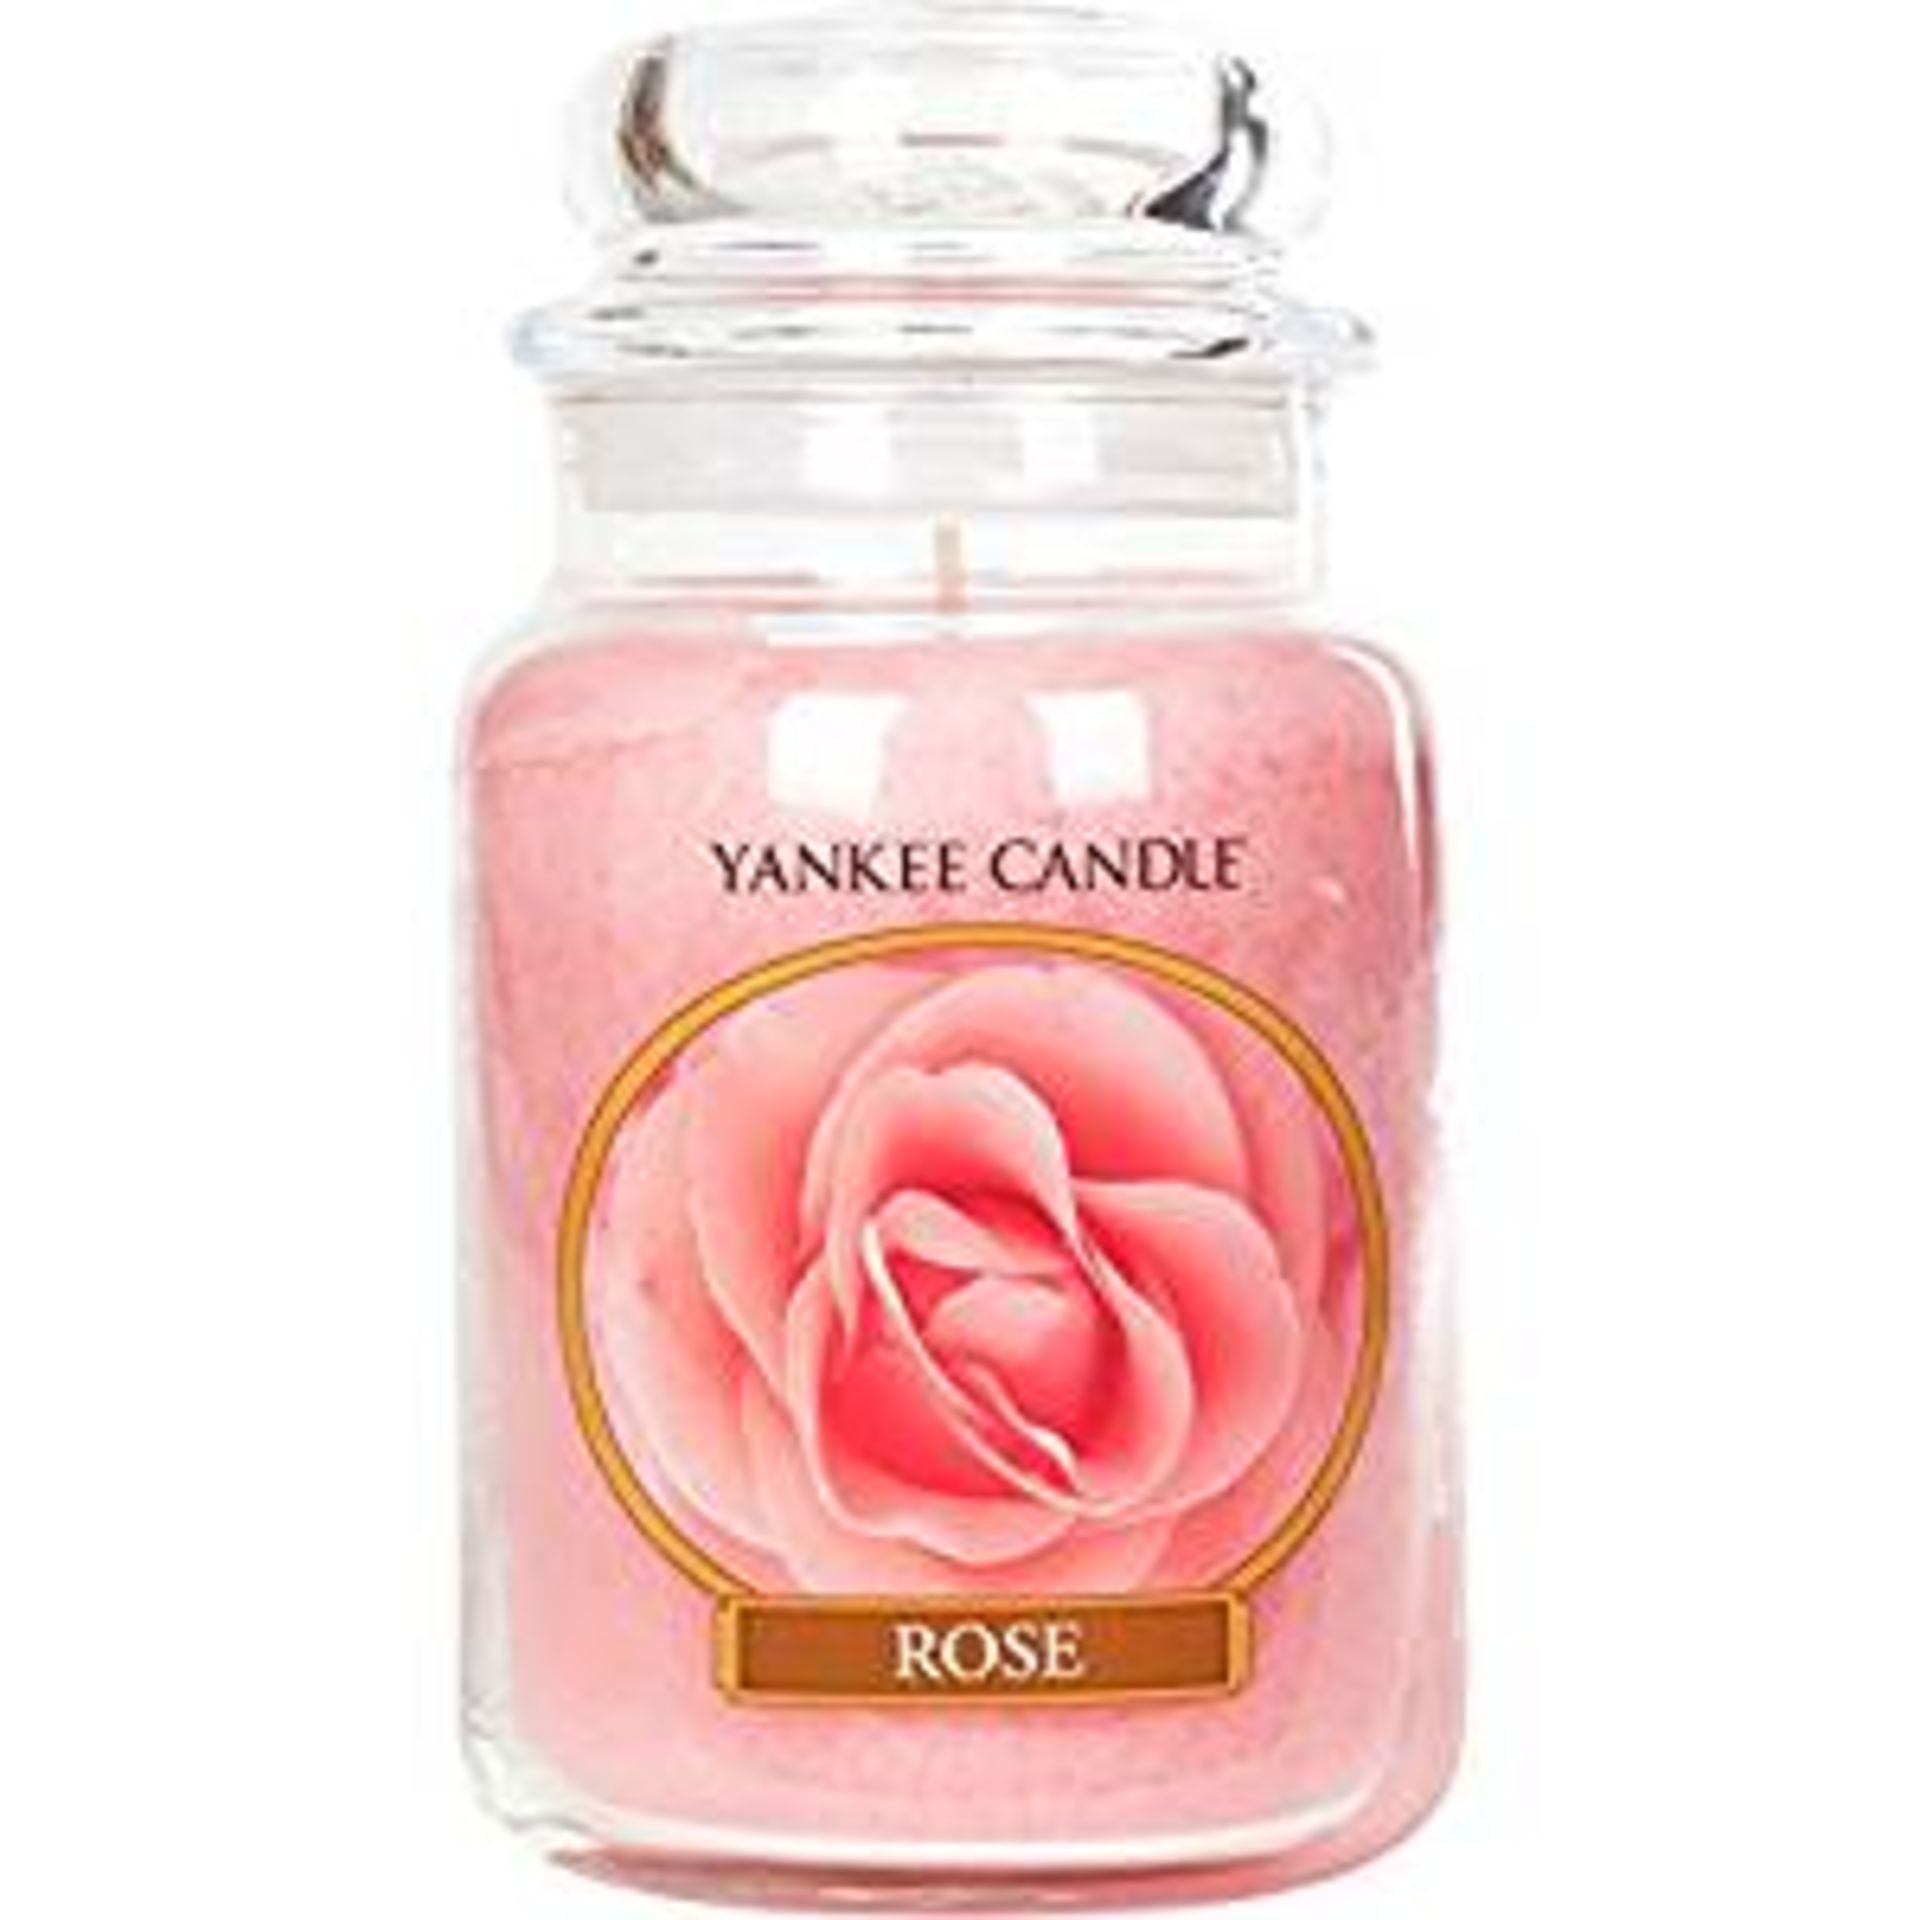 V *TRADE QTY* Brand New Yankee Candle Rose Large 623g Jar - Clintons £23.99 X 18 YOUR BID PRICE TO